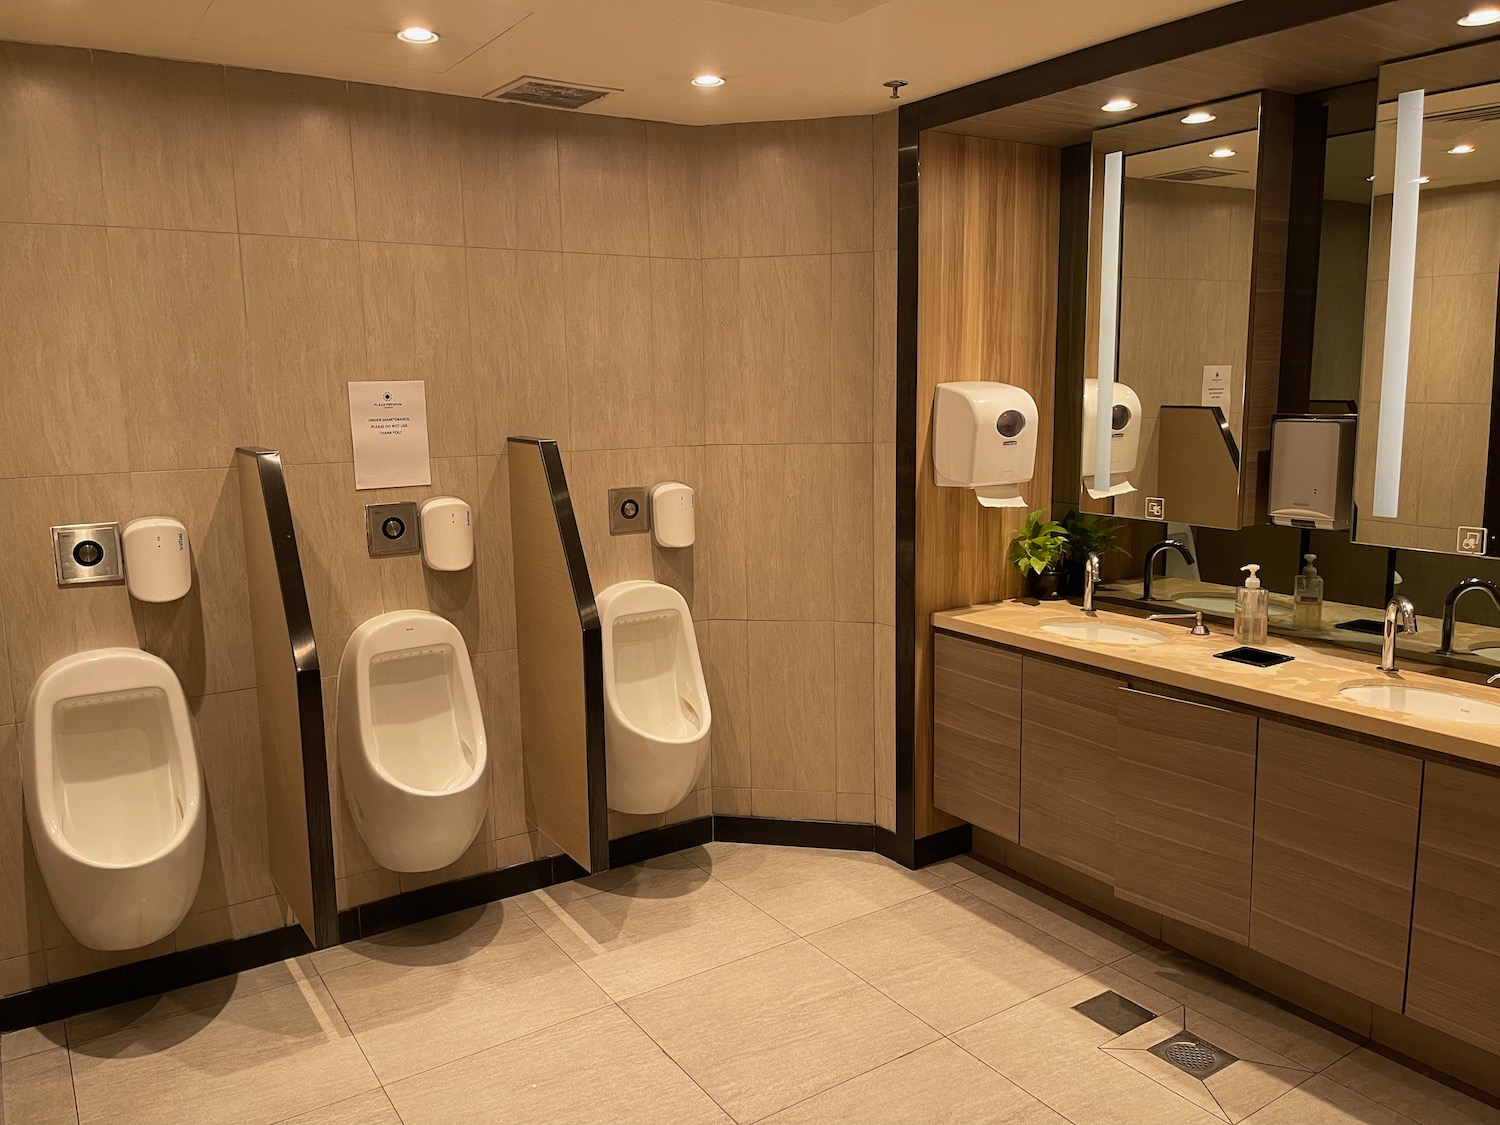 a bathroom with urinals and sink